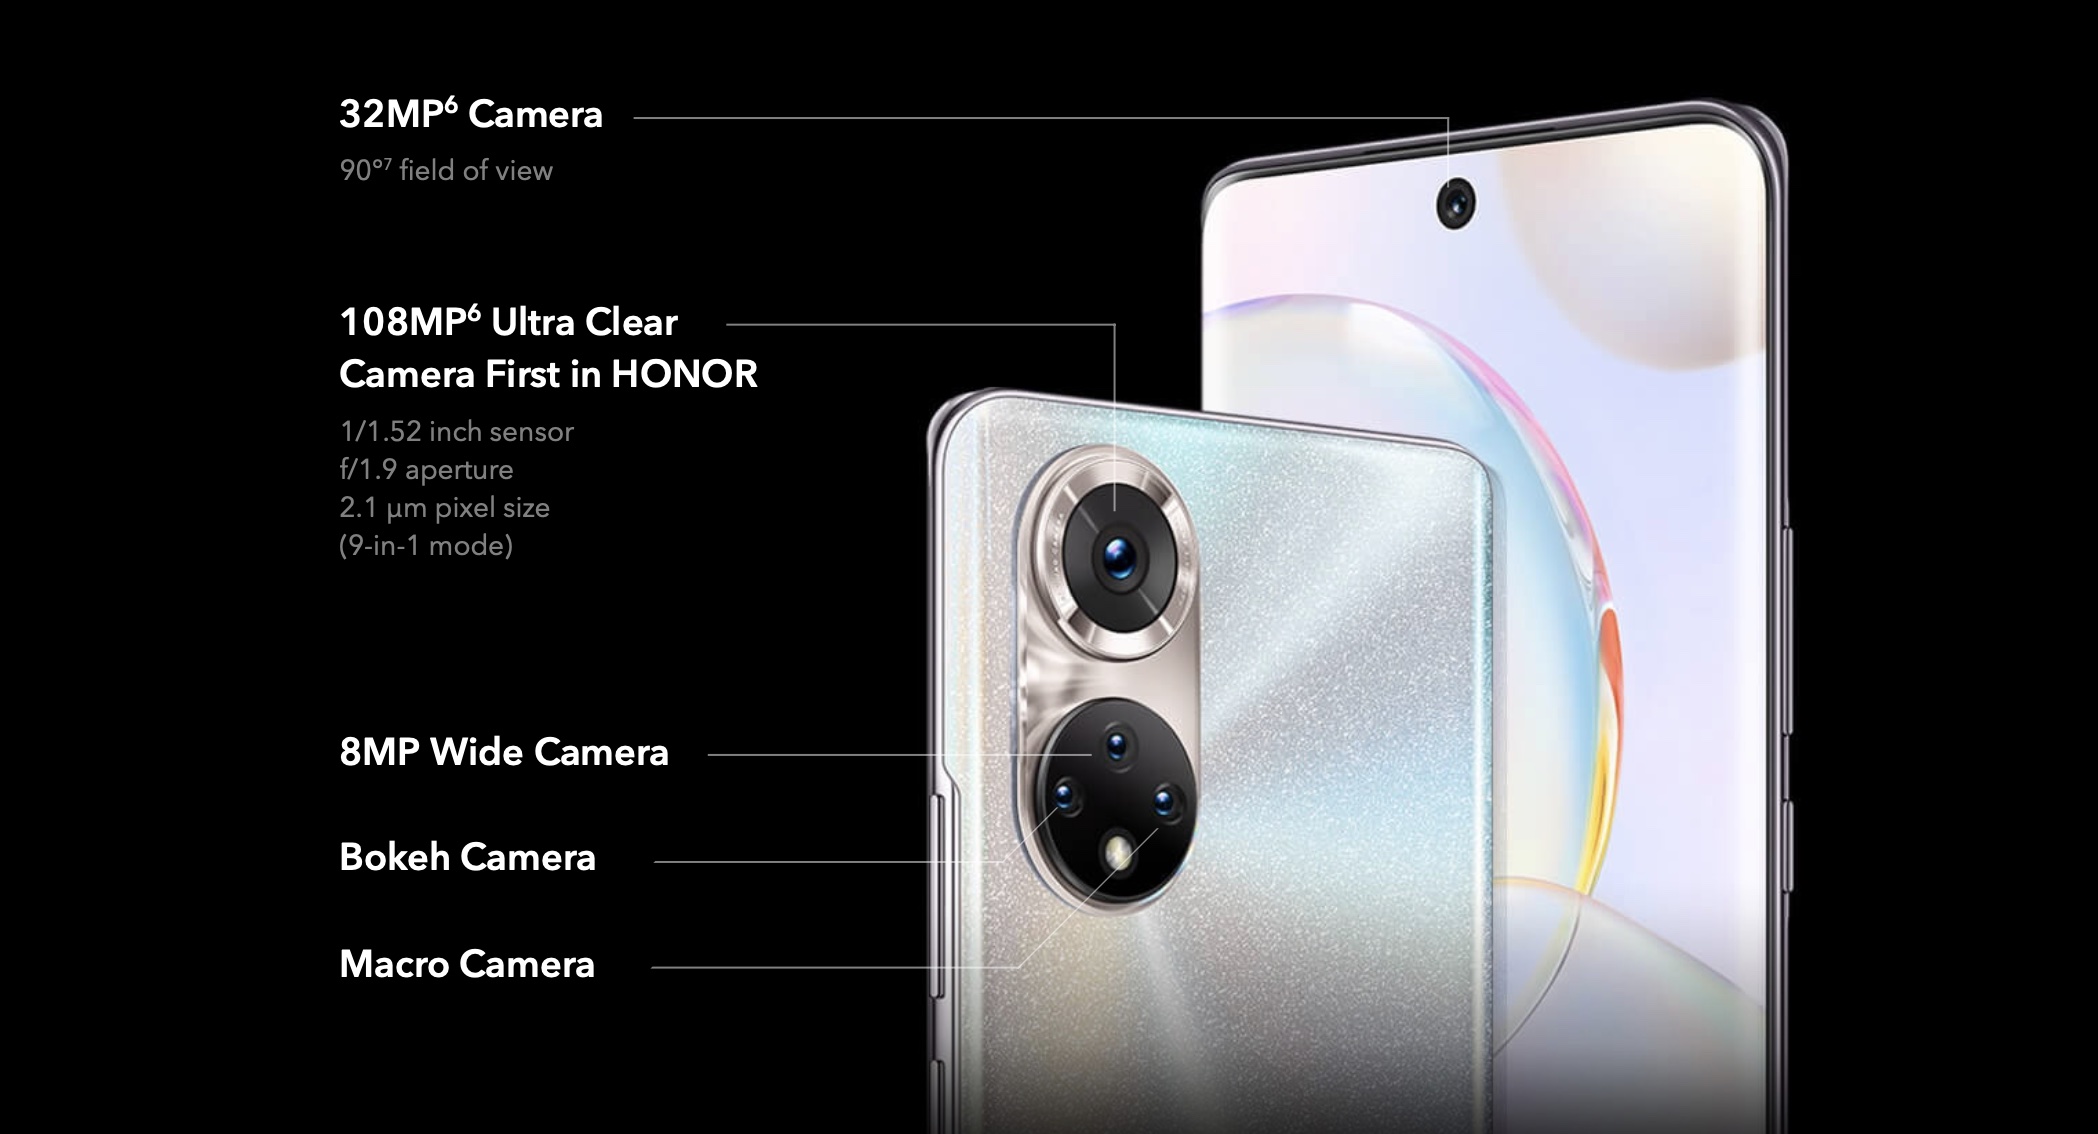 HONOR 50 Smartphone packed with features for the Vlogging Community